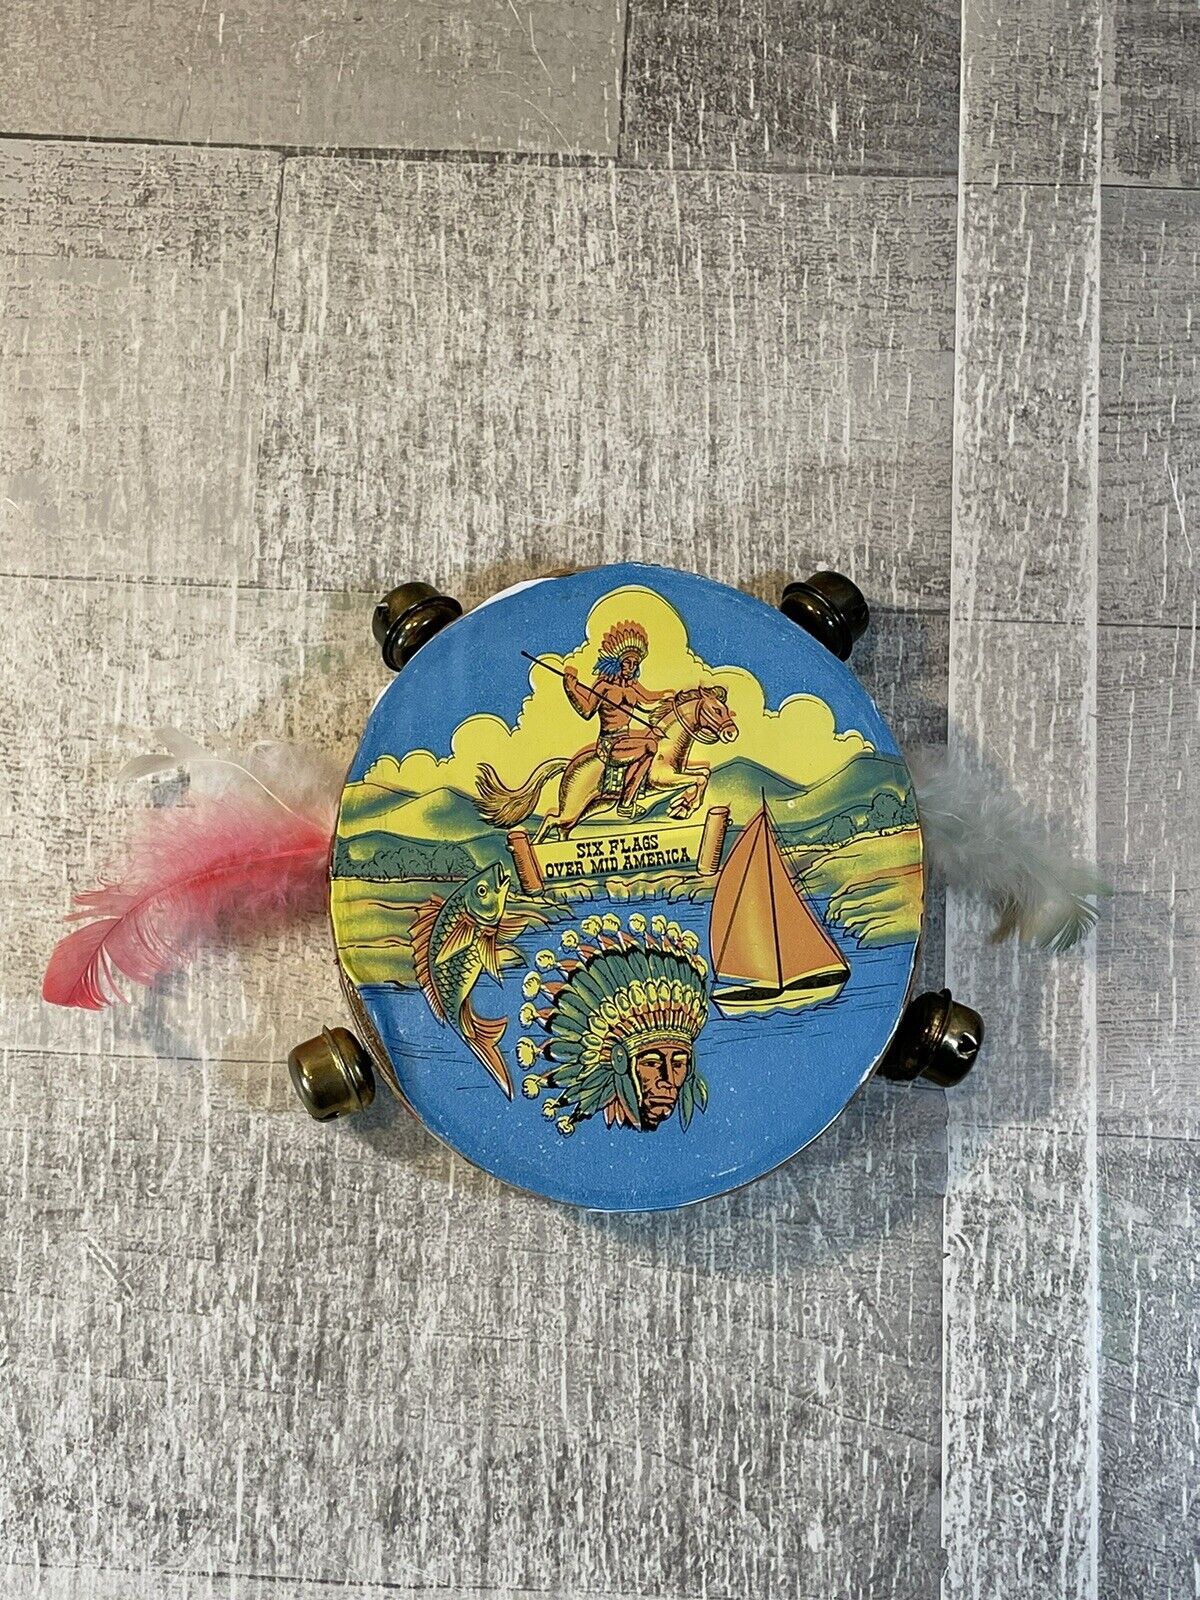 Vintage Six Flags Over Mid America Indian Tambourine Toy Super RARE 5”